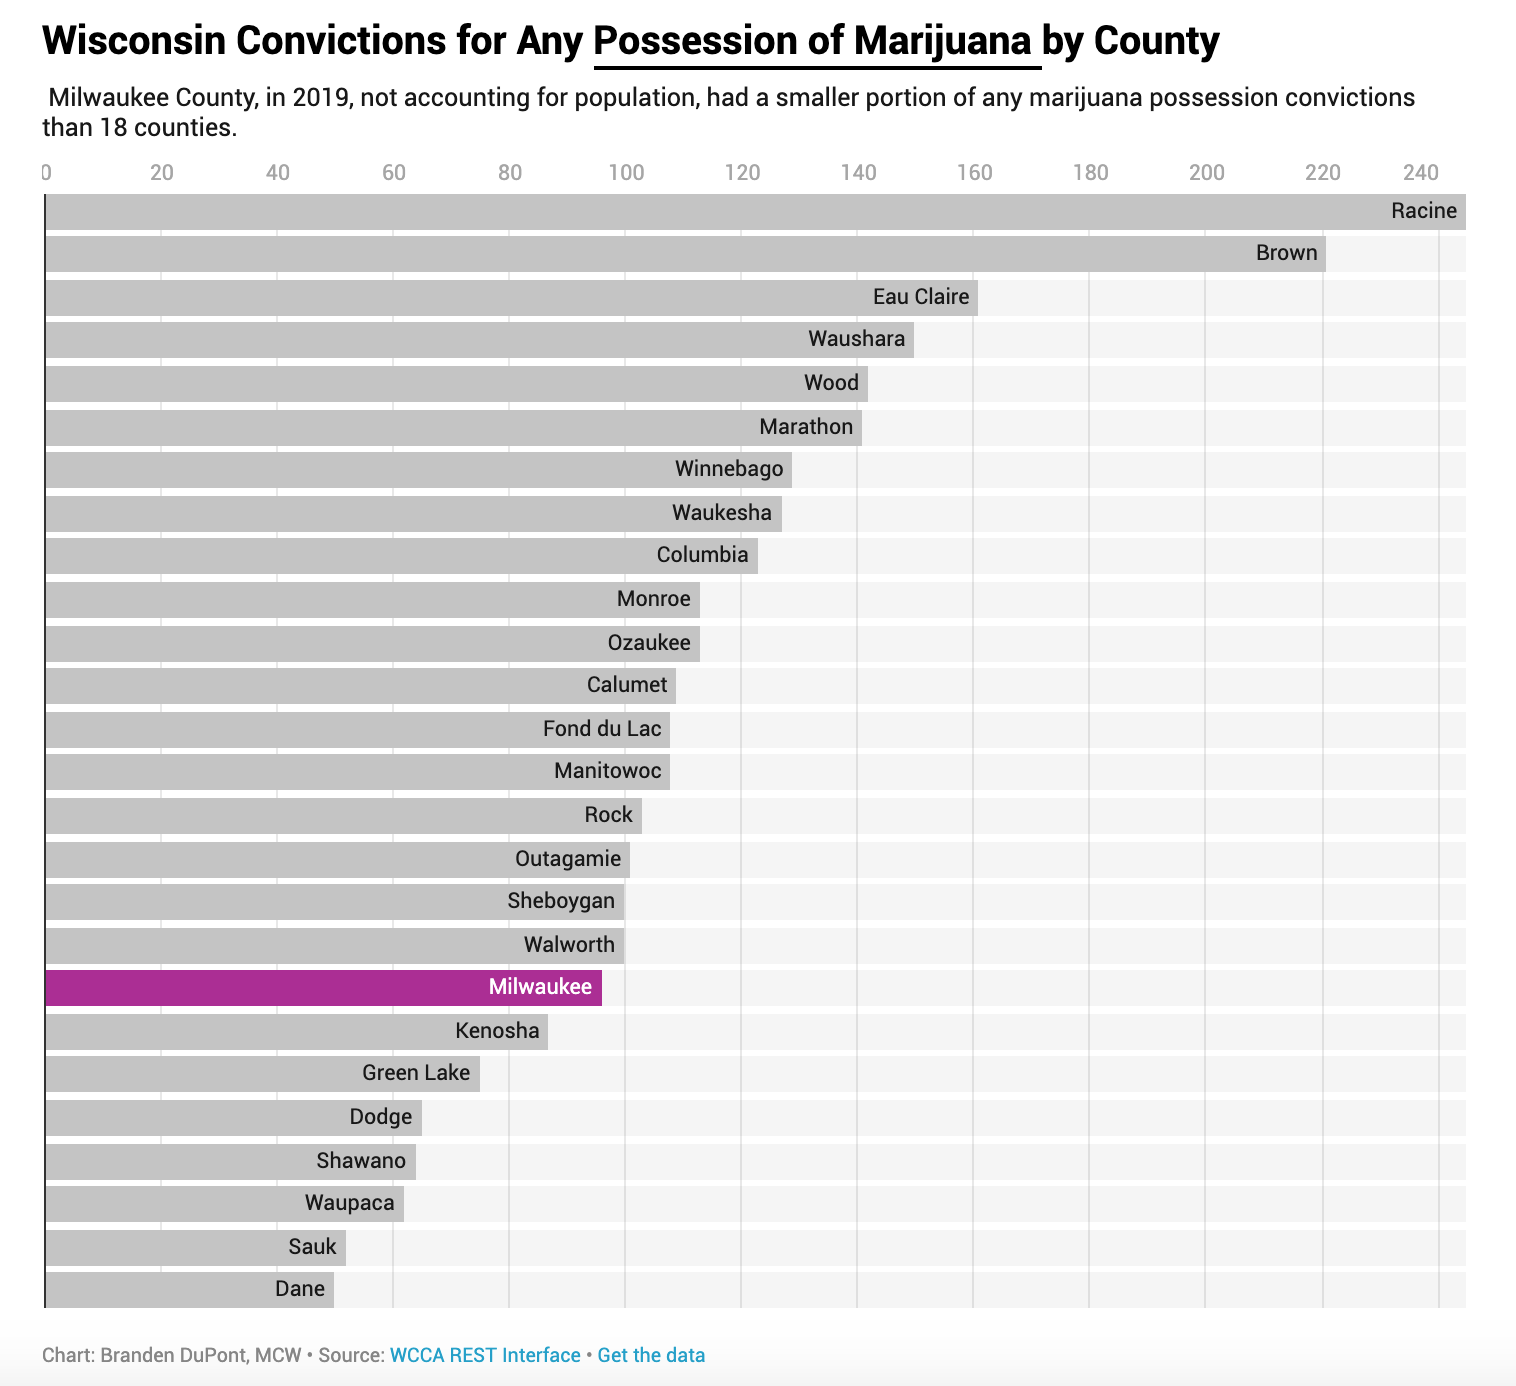 Wisconsin convictions for any possession of marijuana by county